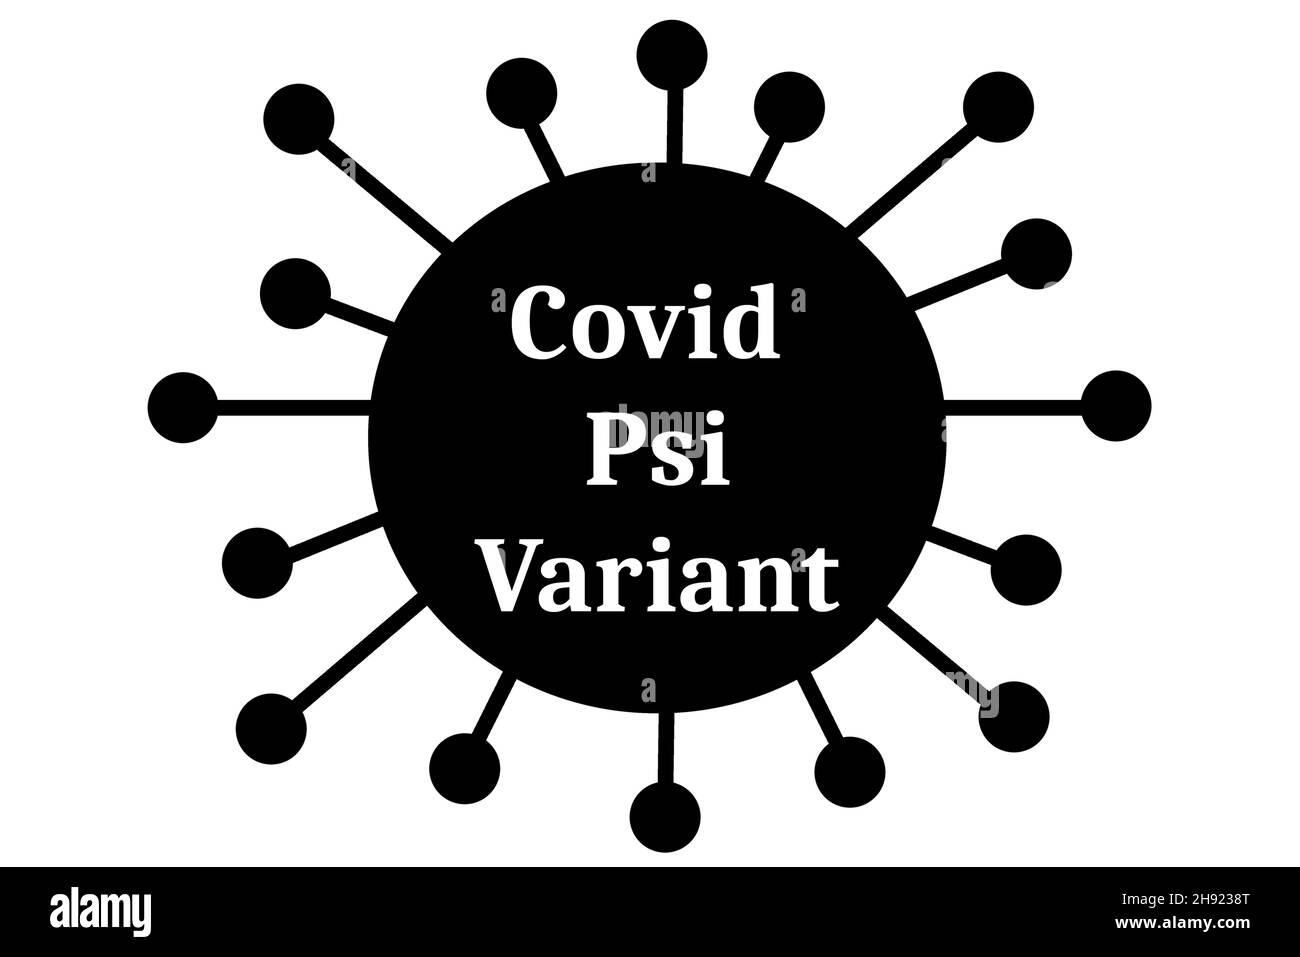 Psi variant, Covid Psi variant isolated on a white background in black and white Stock Photo